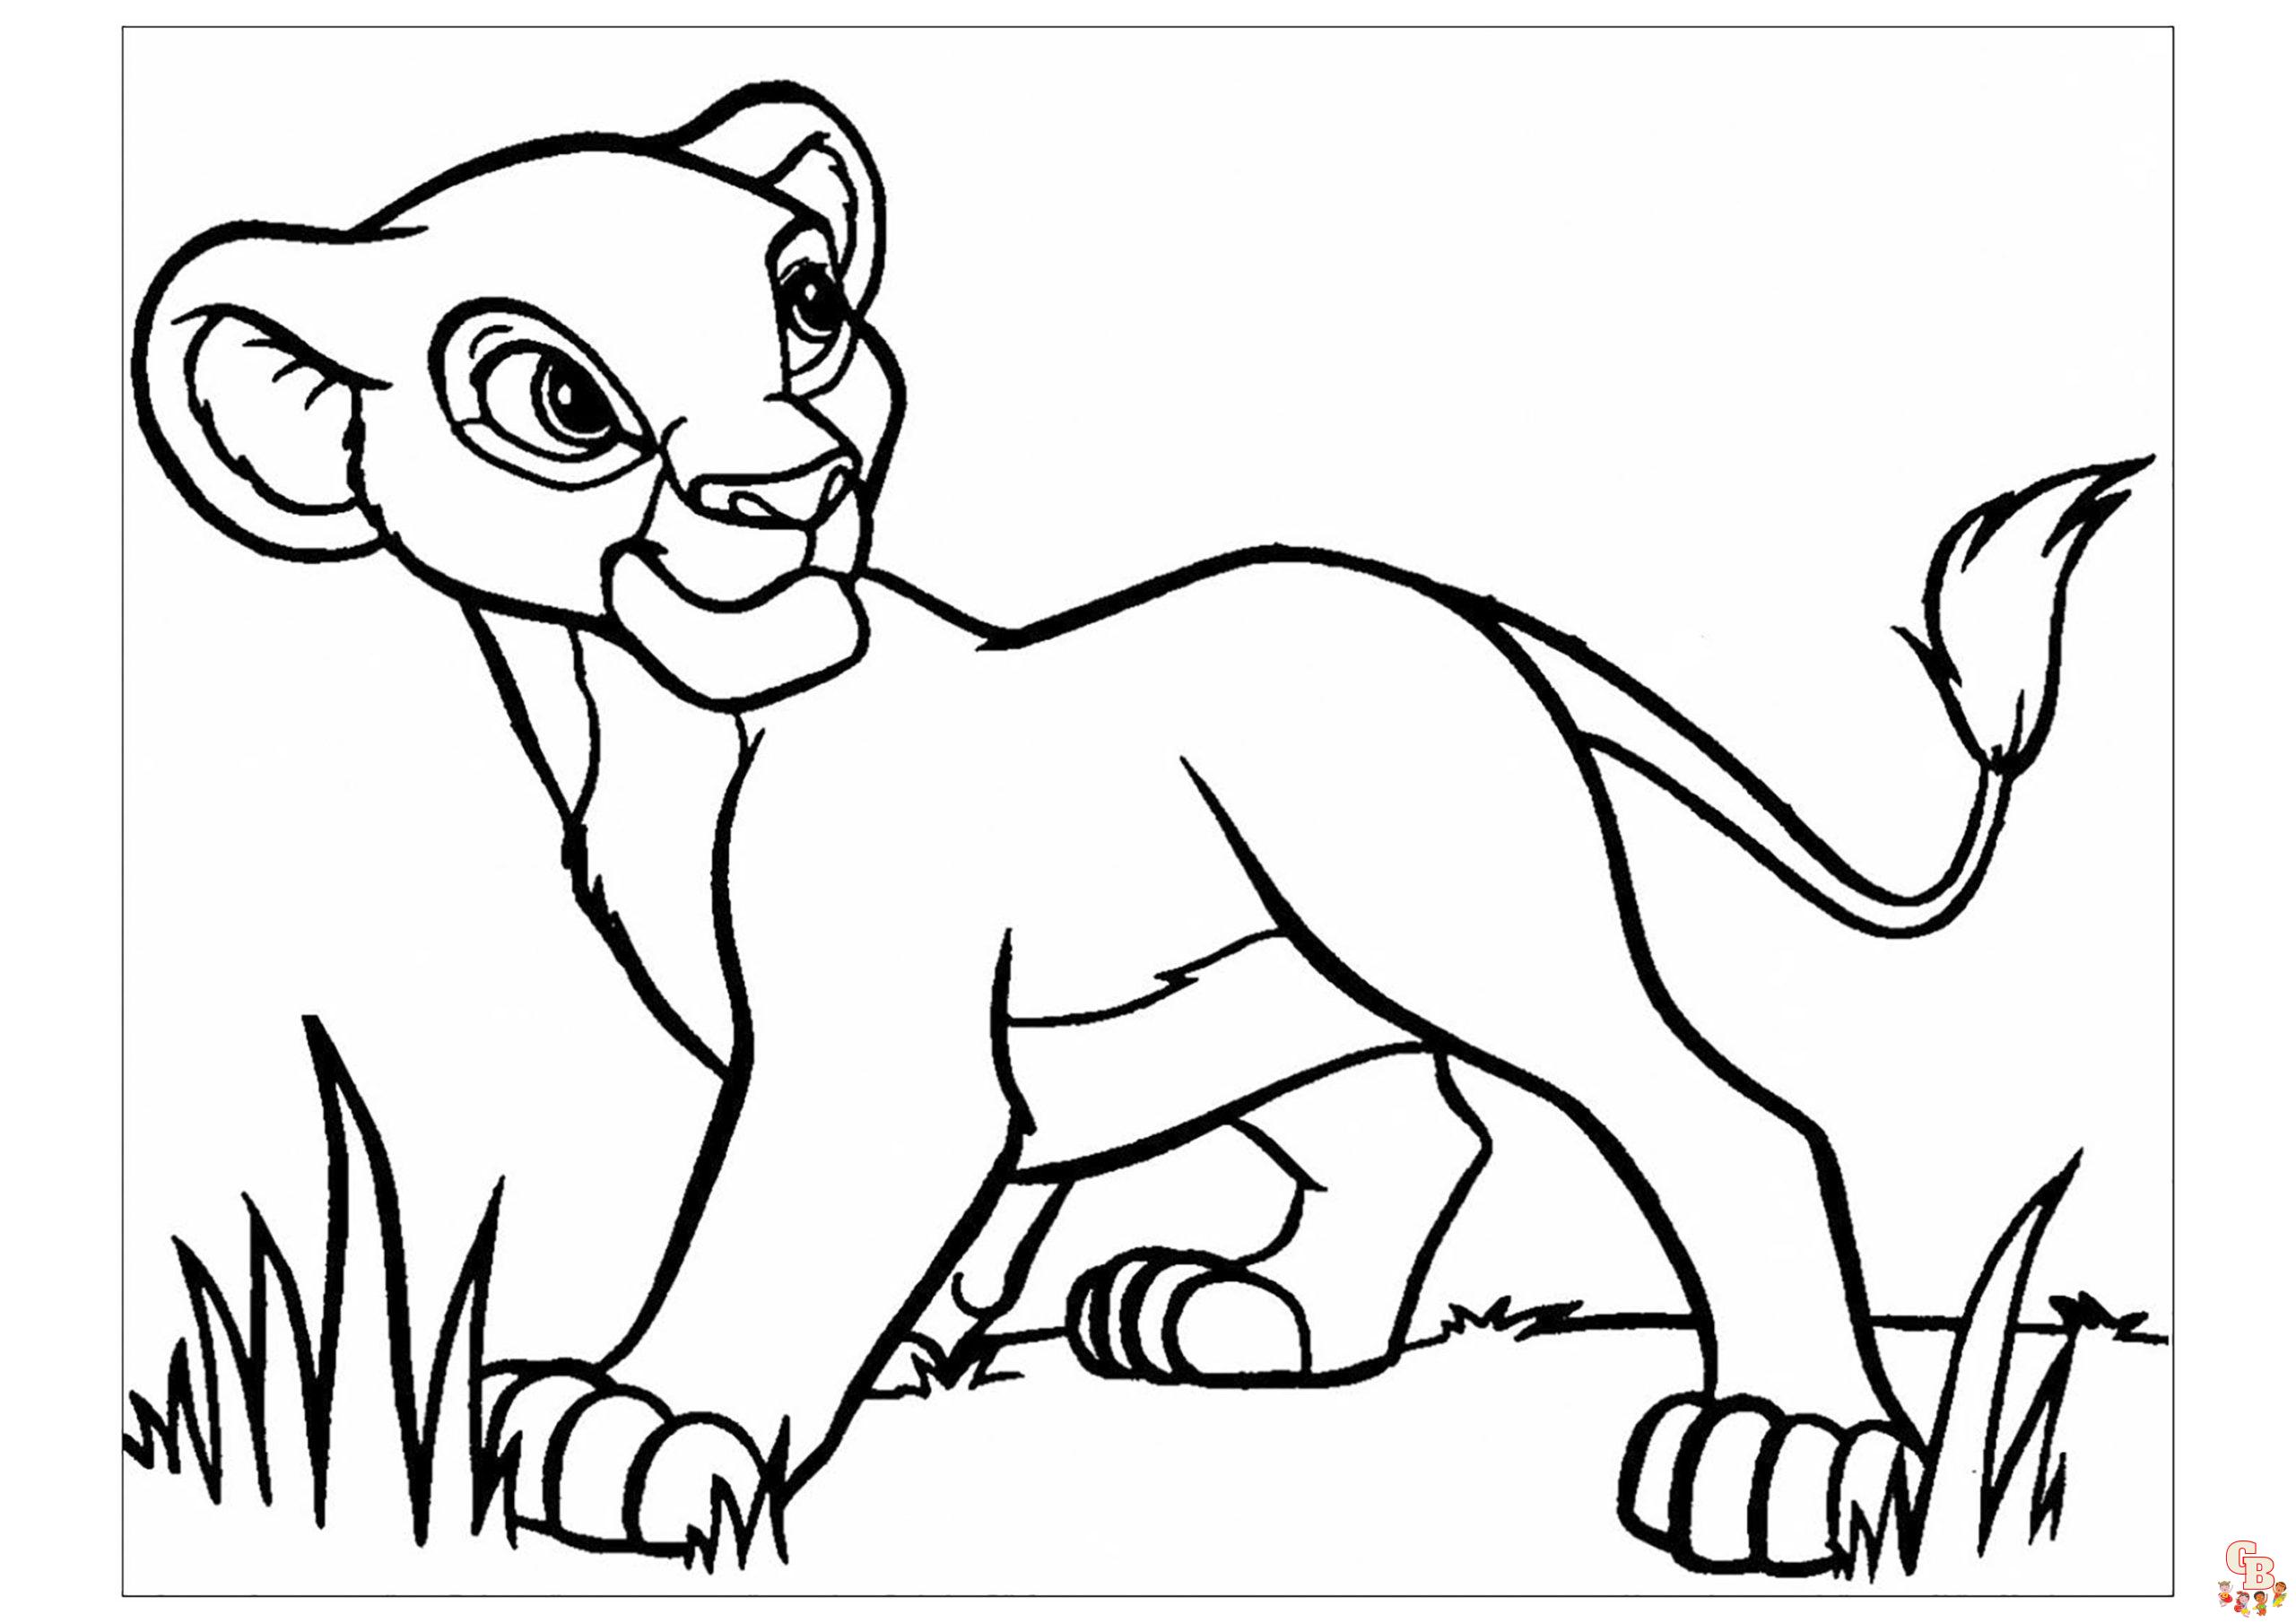 Simba Coloring Pages 11